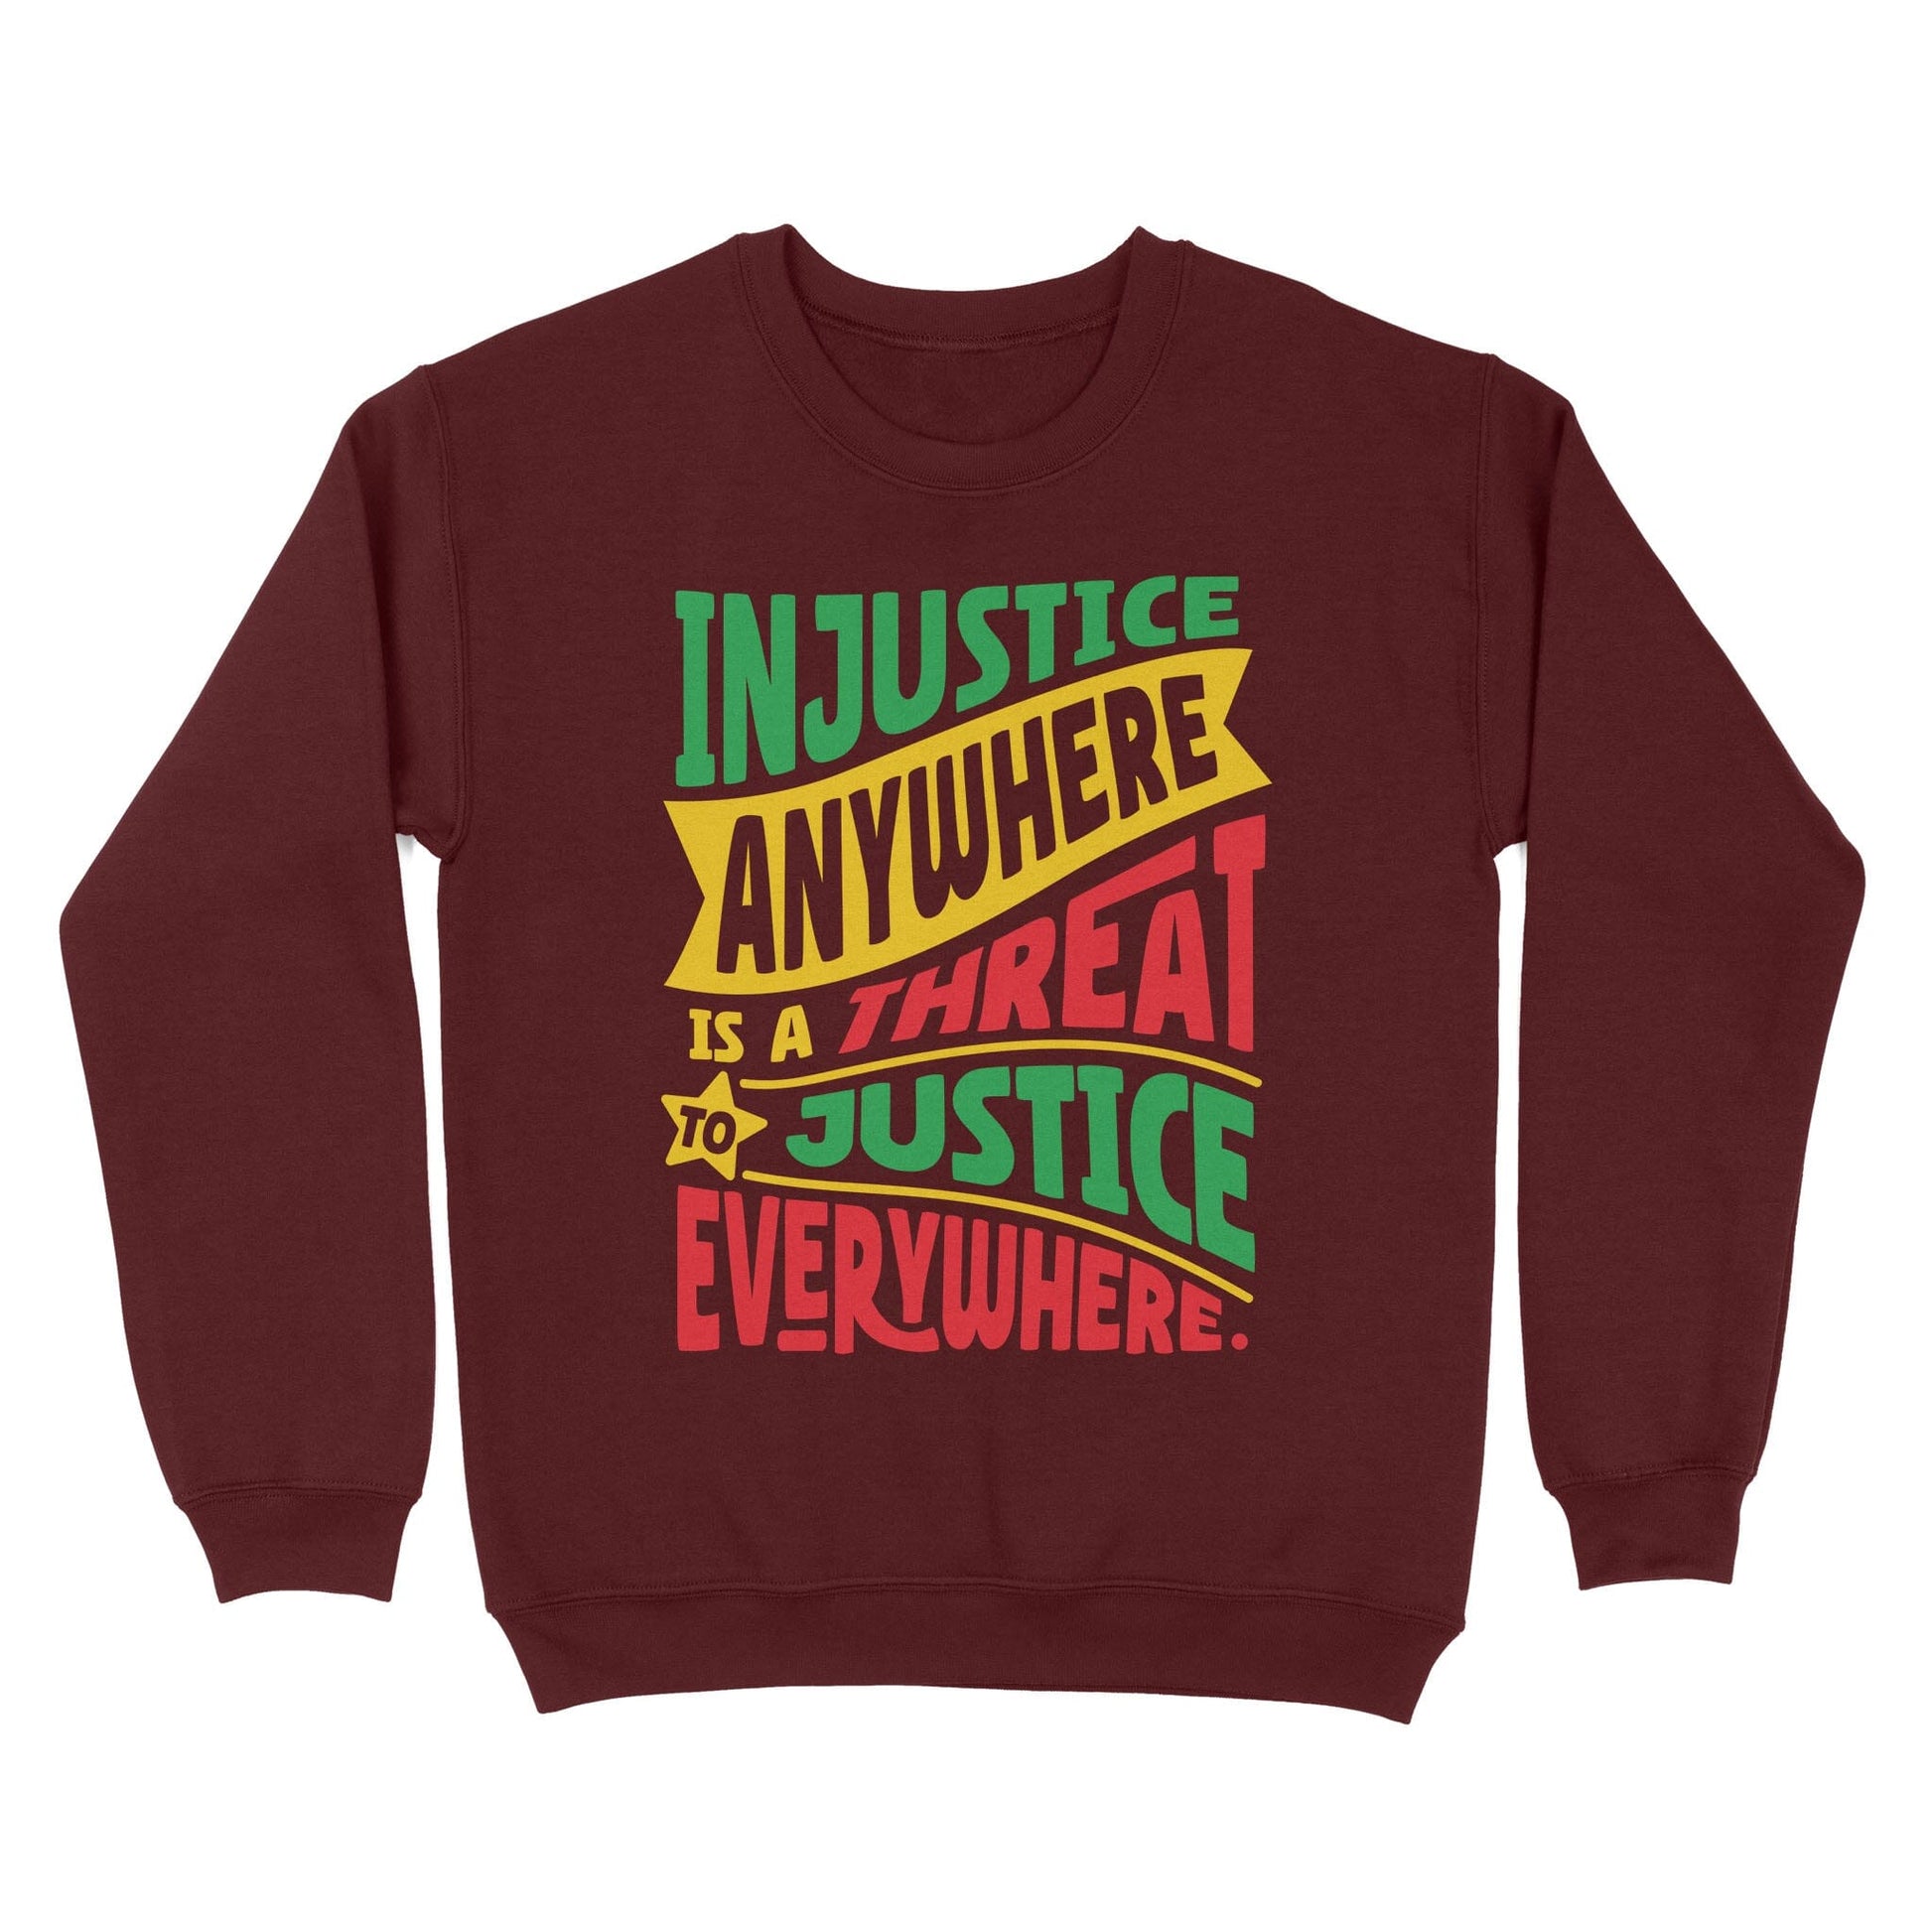 Injustice Anywhere Is A Threat To Justice Everywhere Sweatshirt Apparel Gearment Maroon S 